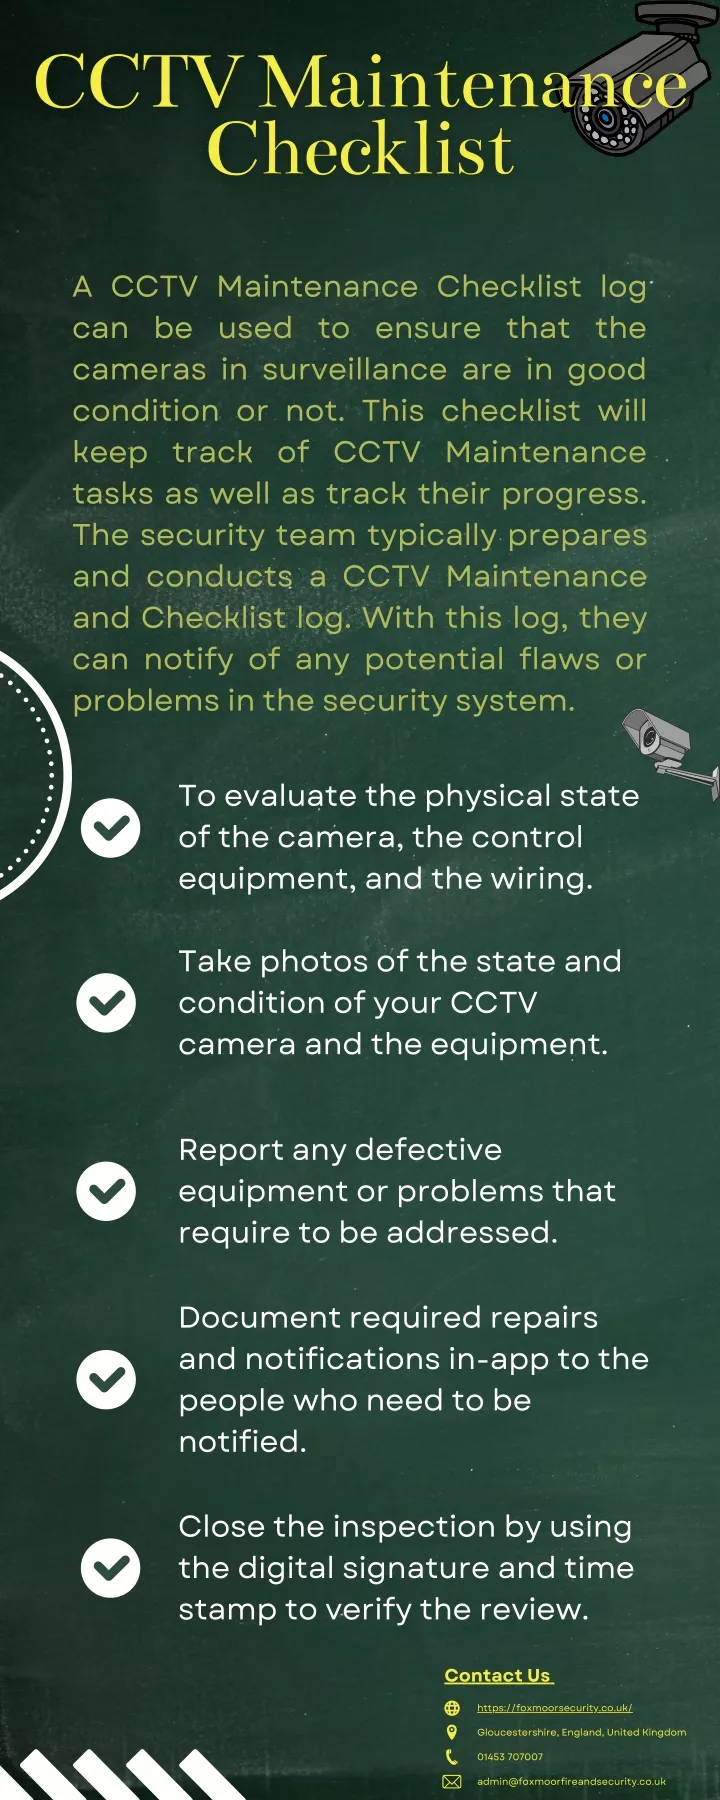 a cctv maintenance checklist log can be used